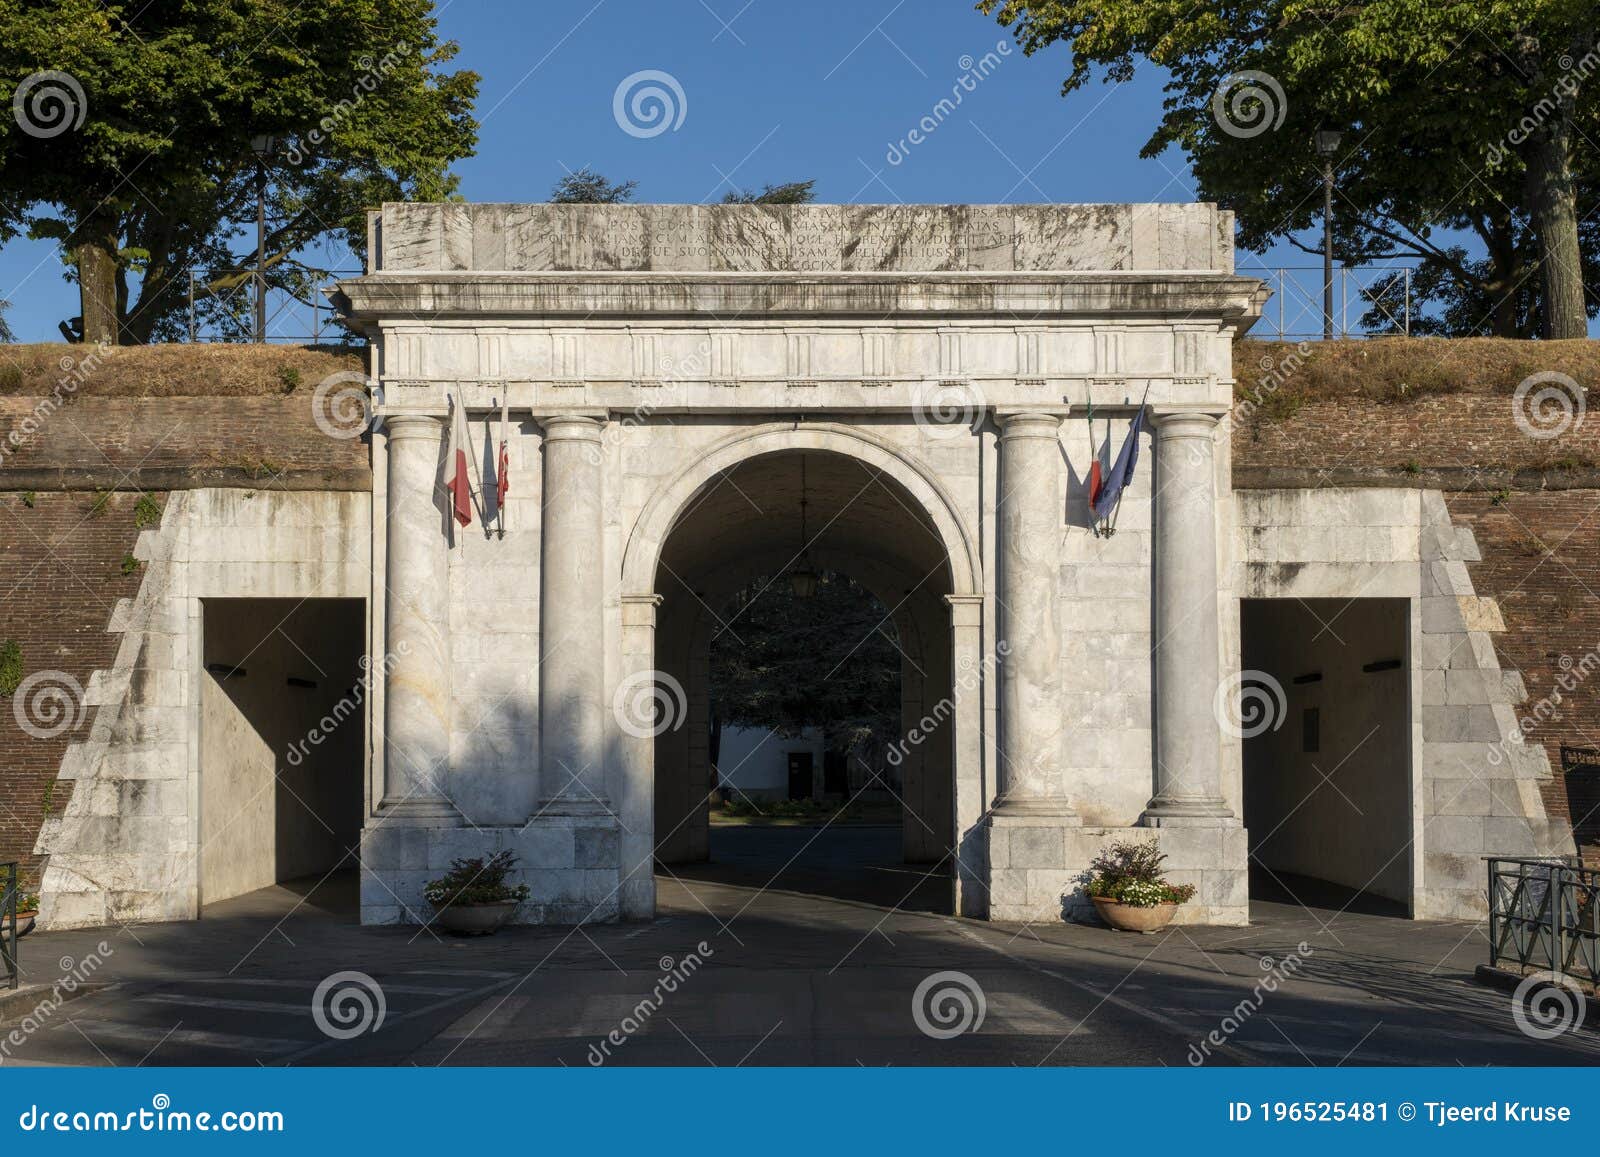 Porta Elisa, Lucca, Tuscany, Italy Stock Image - Image of lucca, city ...